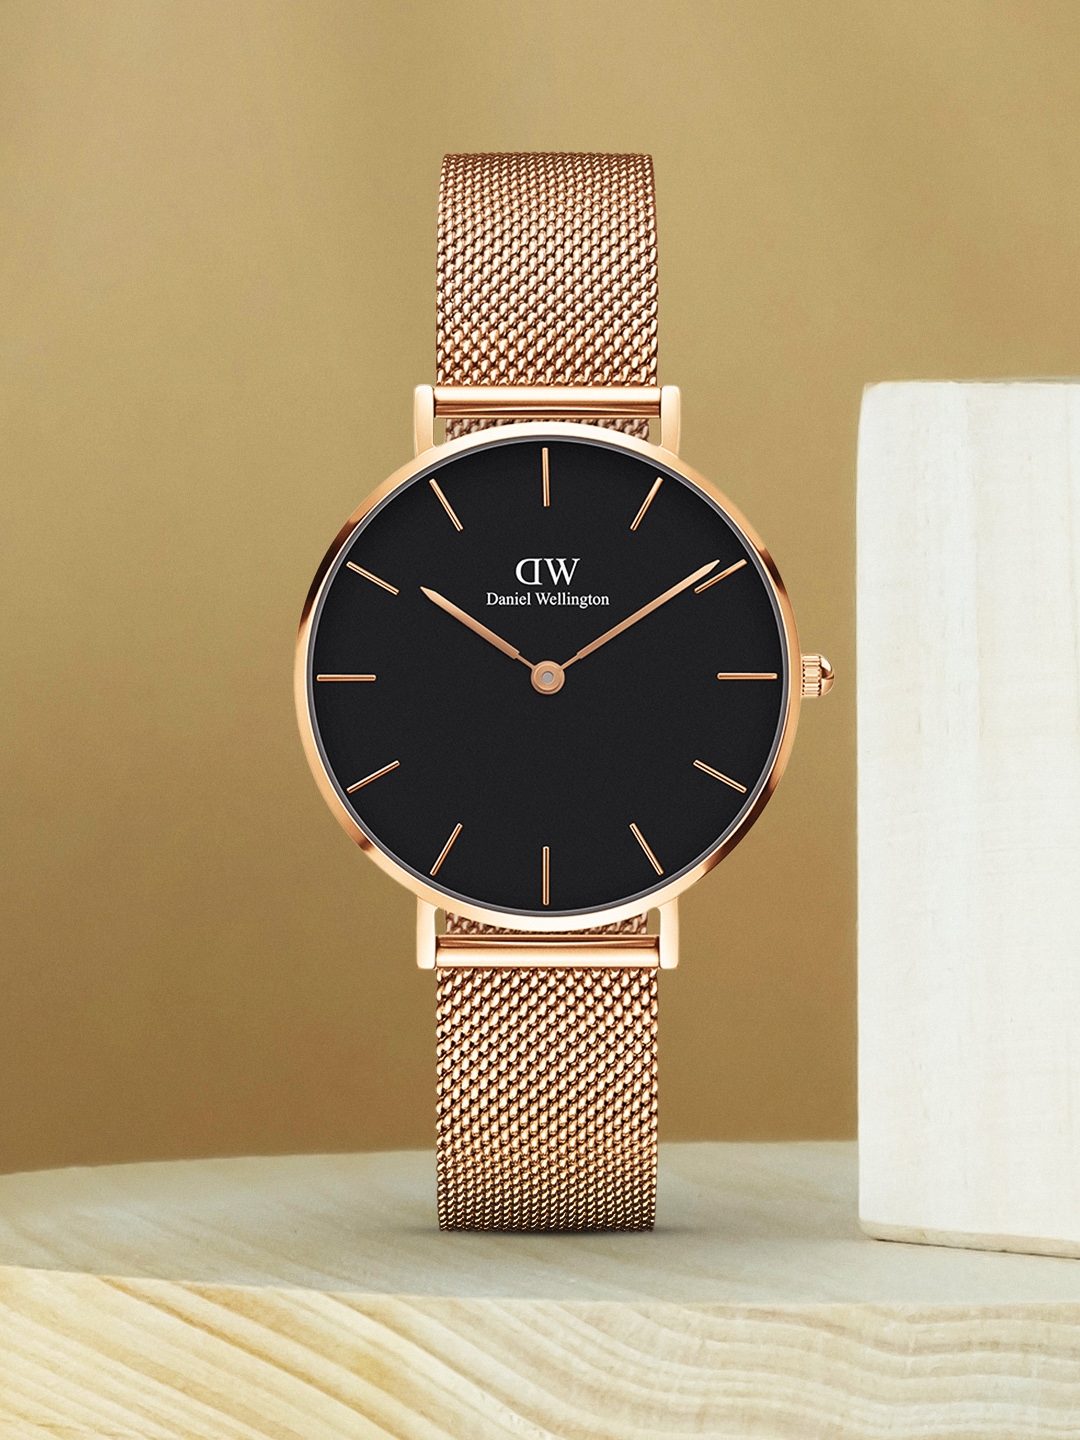 Daniel Wellington chronograph Watch DW – The Time Series-sonthuy.vn